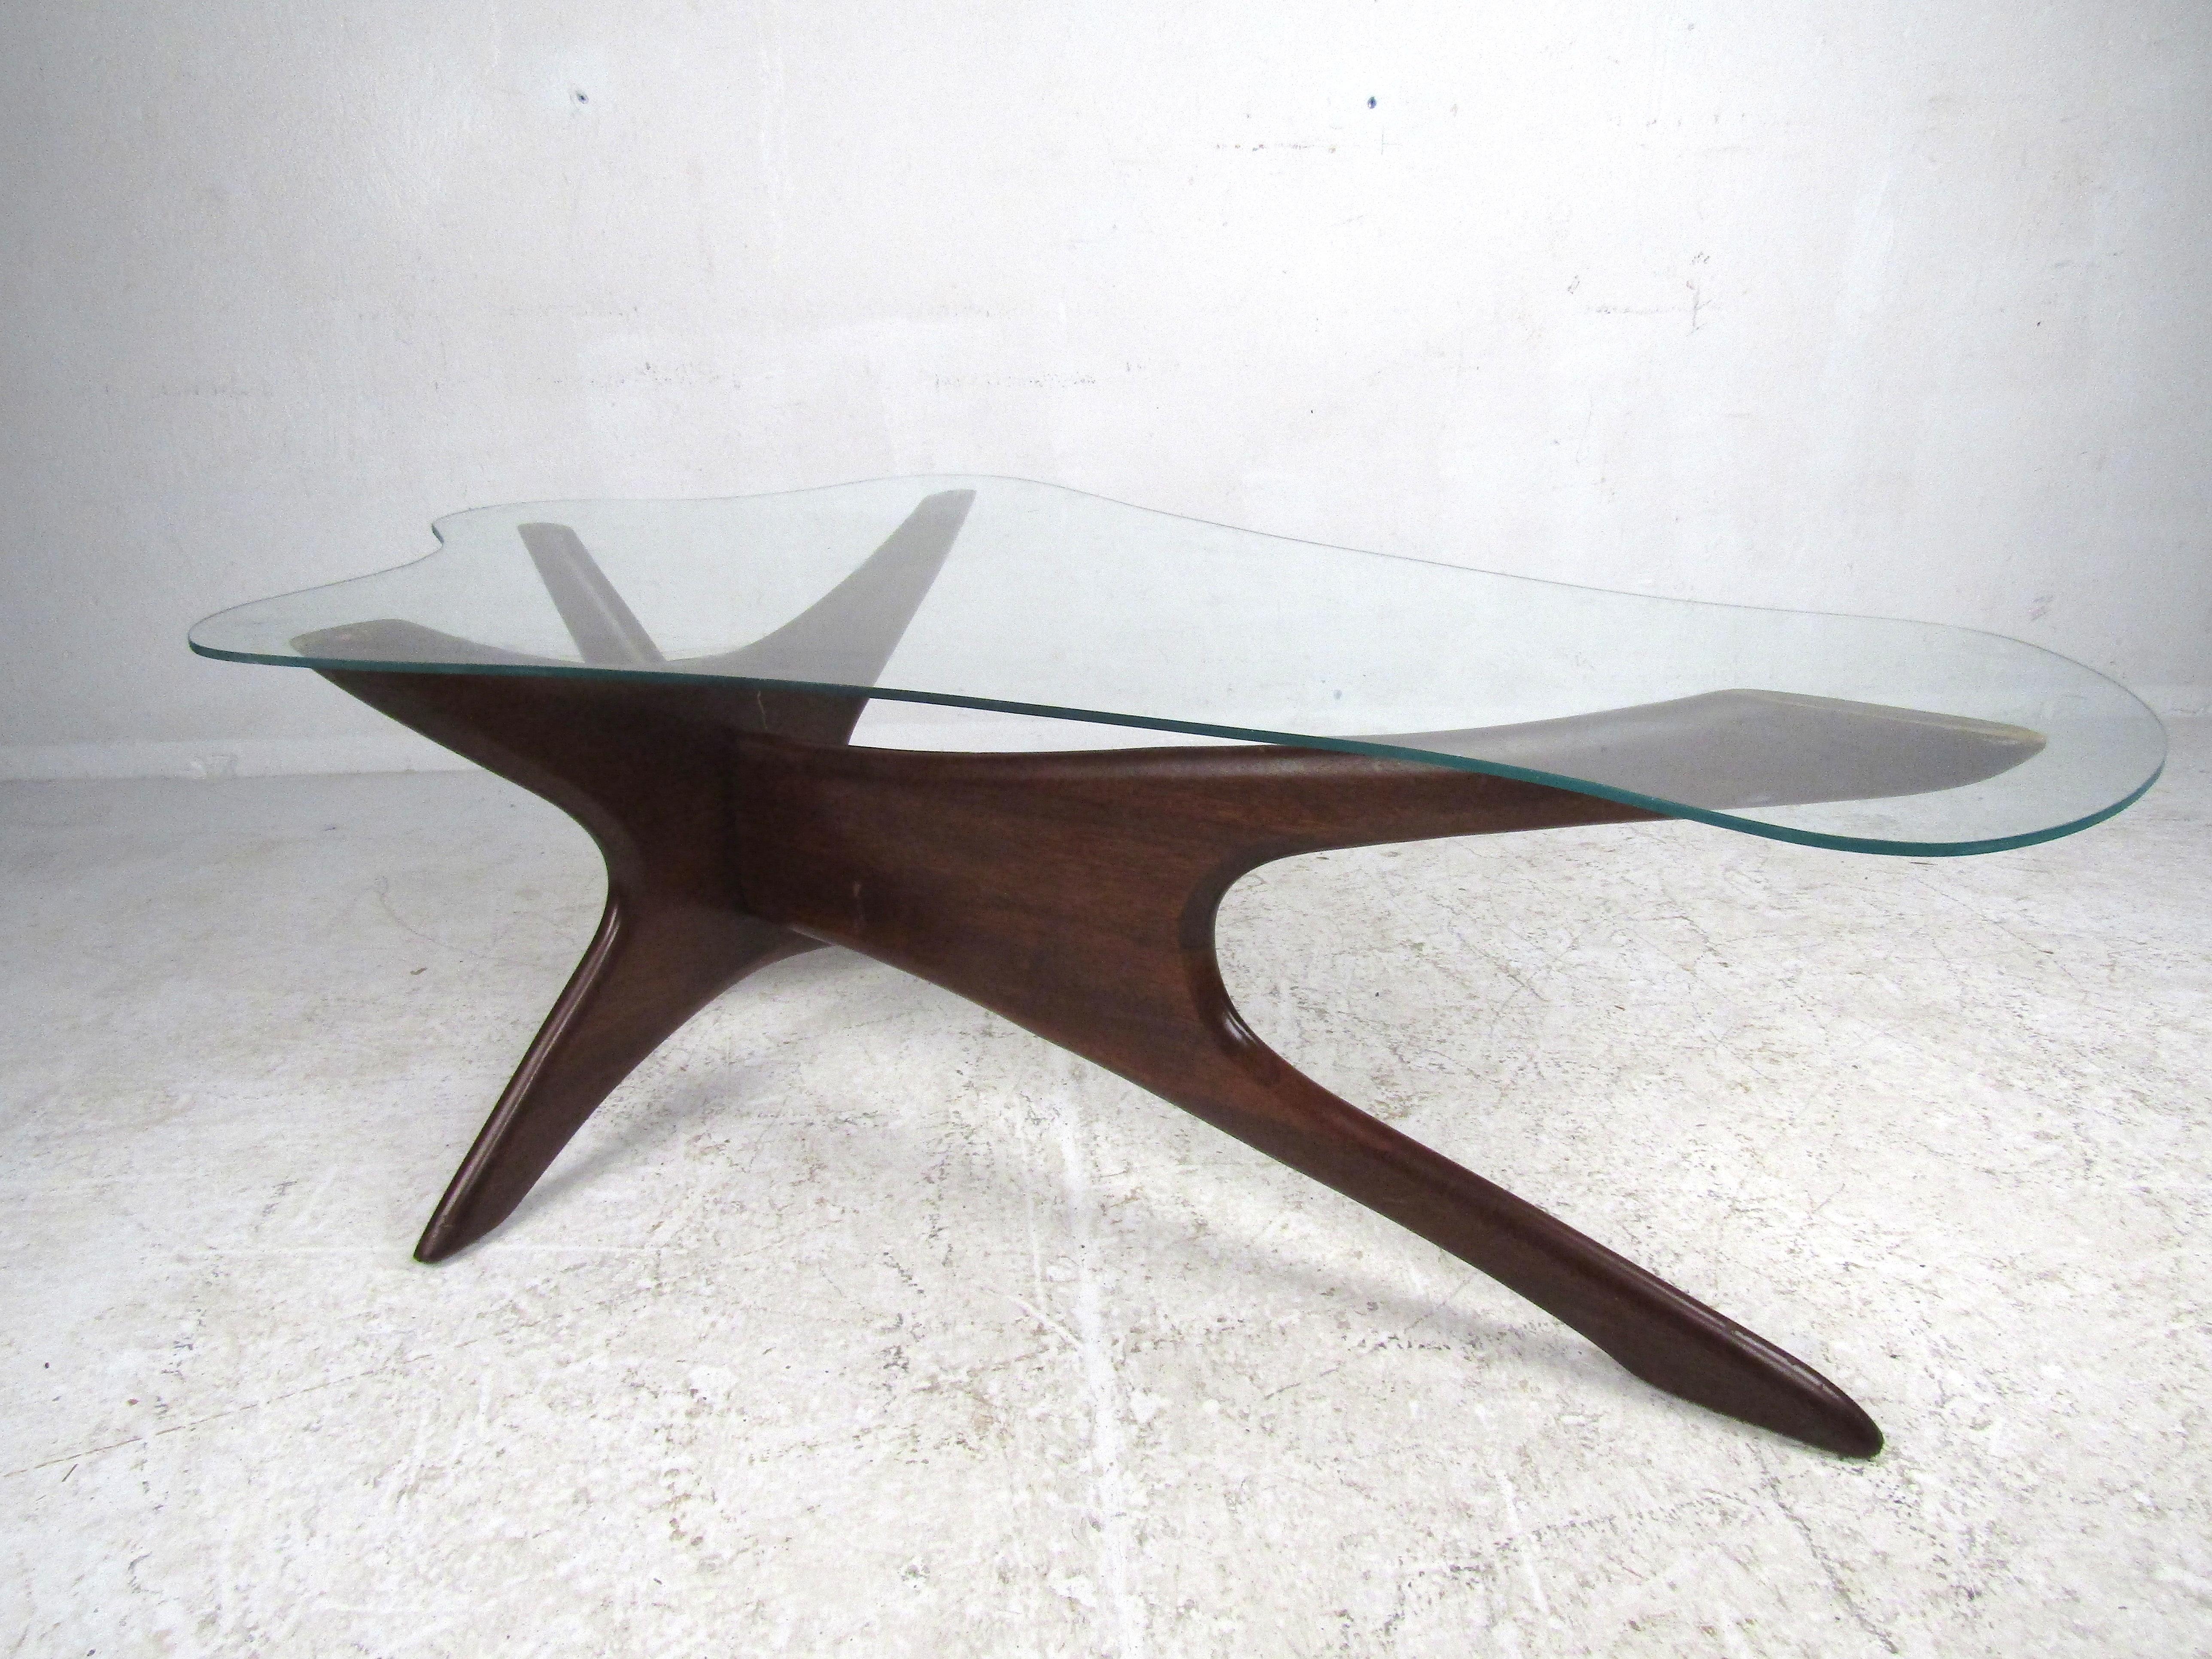 Unique Mid-Century Modern coffee table designed by Adrian Pearsall with an unusually shaped glass-top. Sturdy construction with a sculptural Jax style wooden base with a dark finish applied. Eye-catching table that is sure to be a great addition to